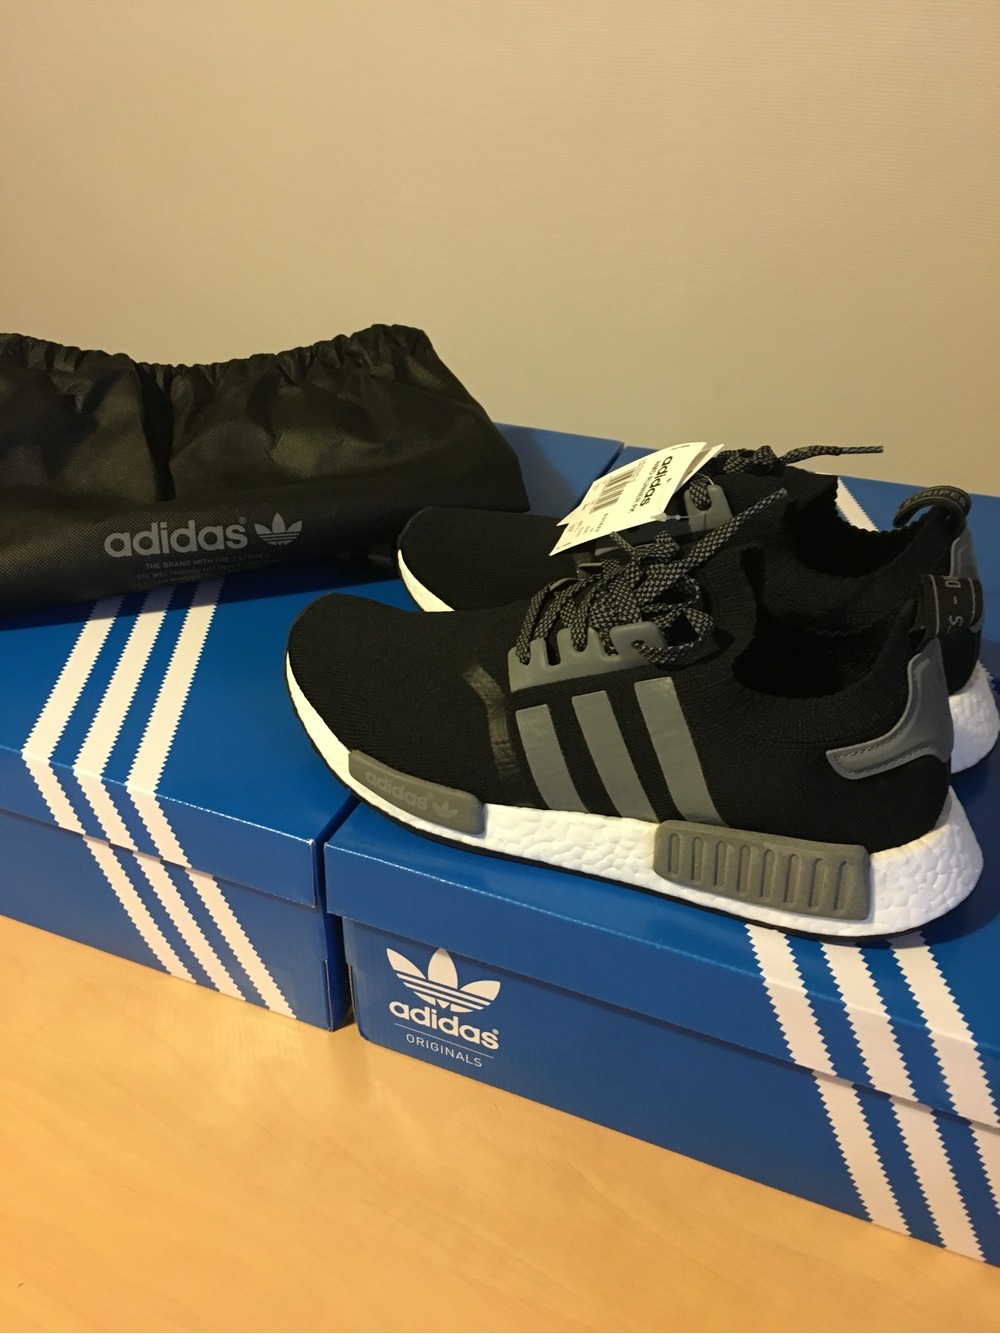 Buy nmd for sale - 50% OFF